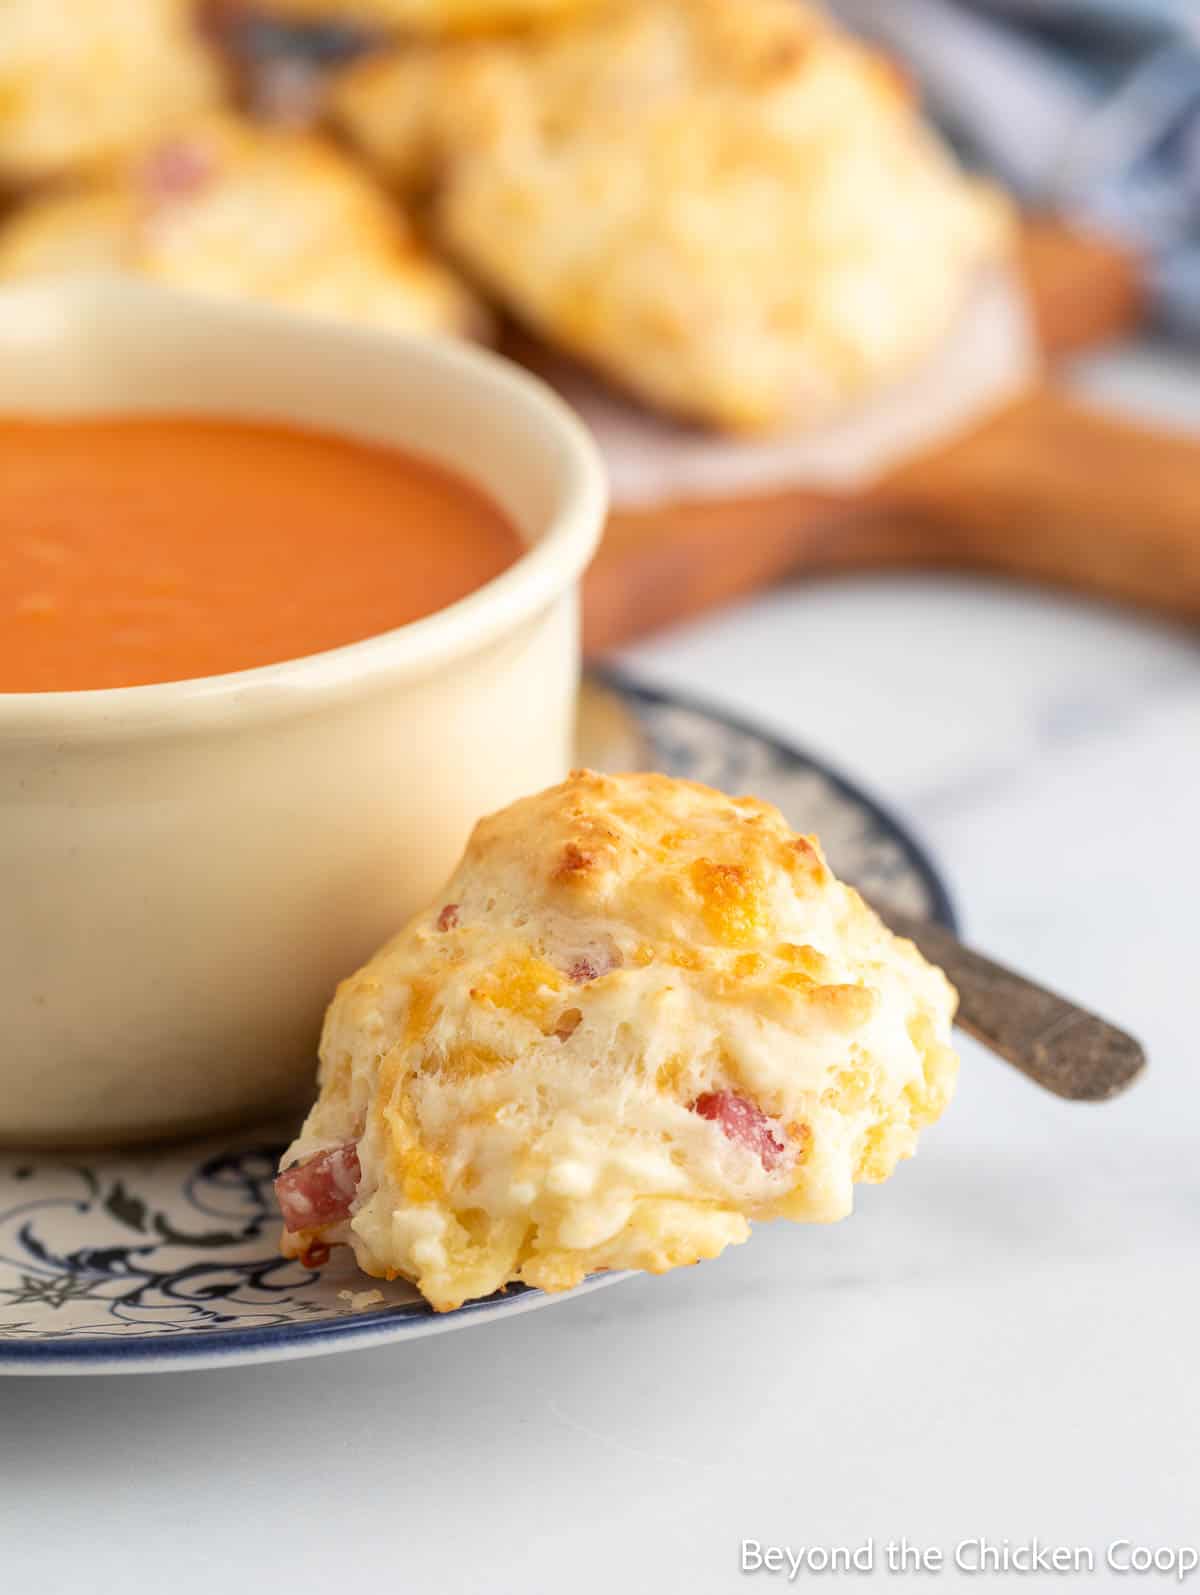 A biscuit with ham and cheese on a plate next to a bowl of soup.